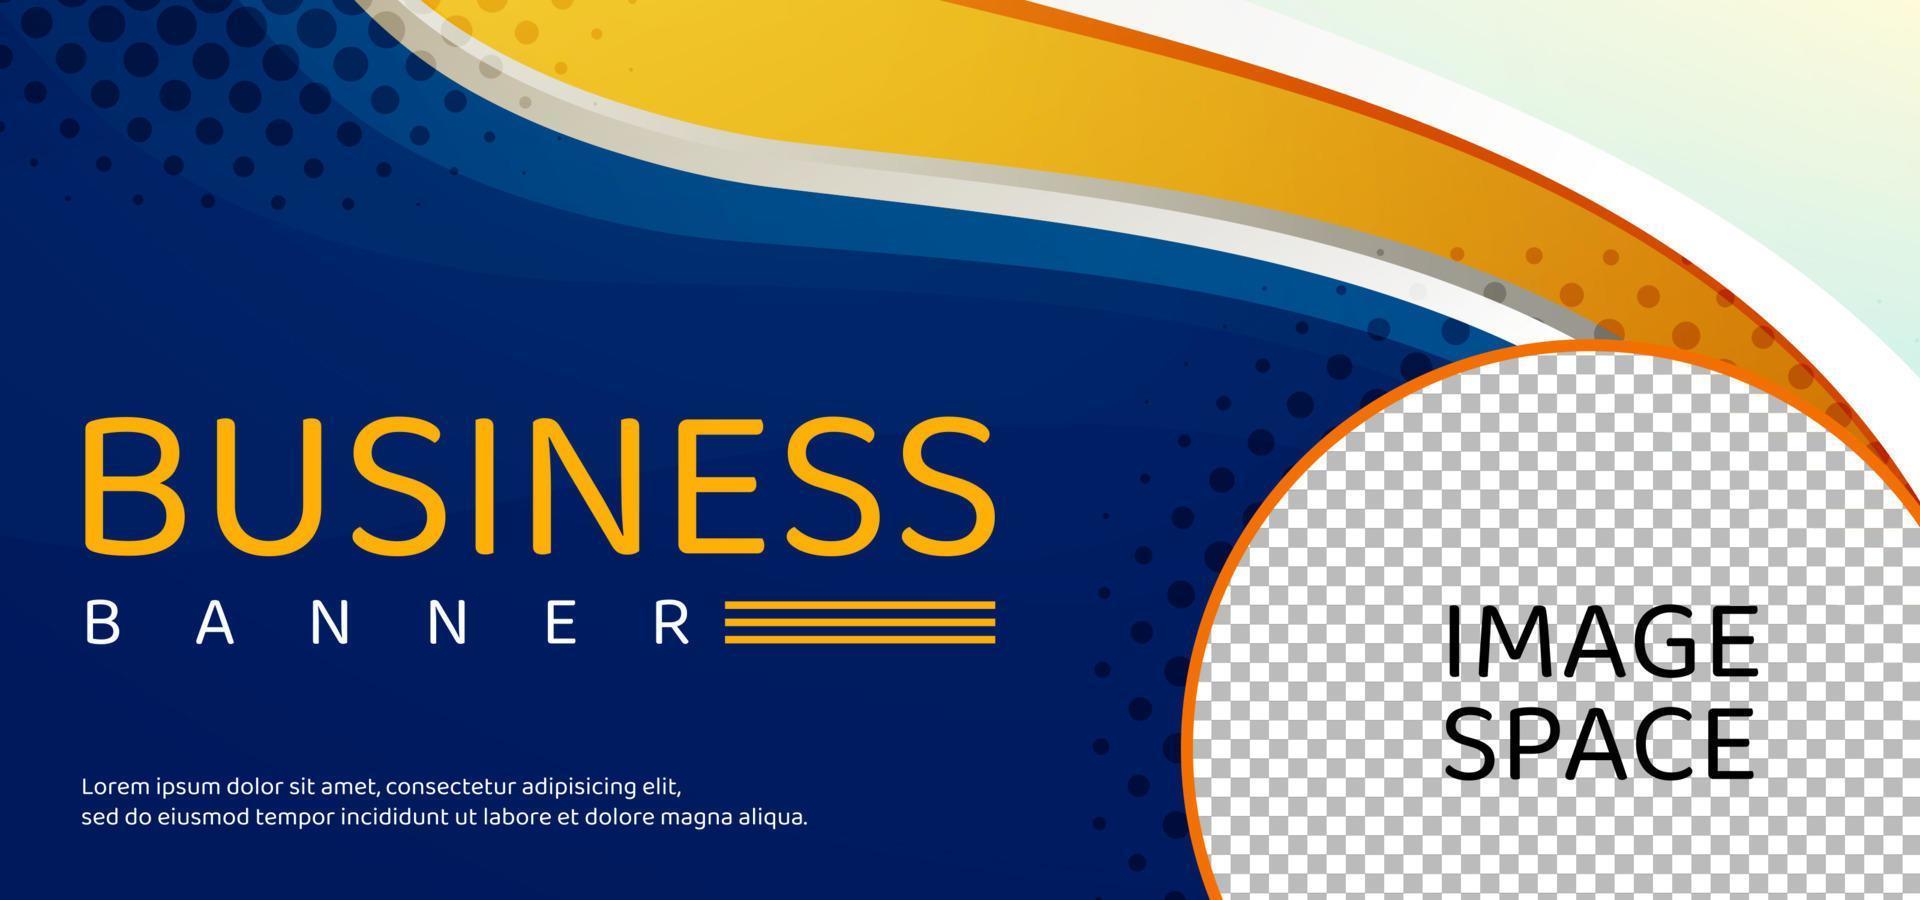 Modern blue and orange business banner template vector